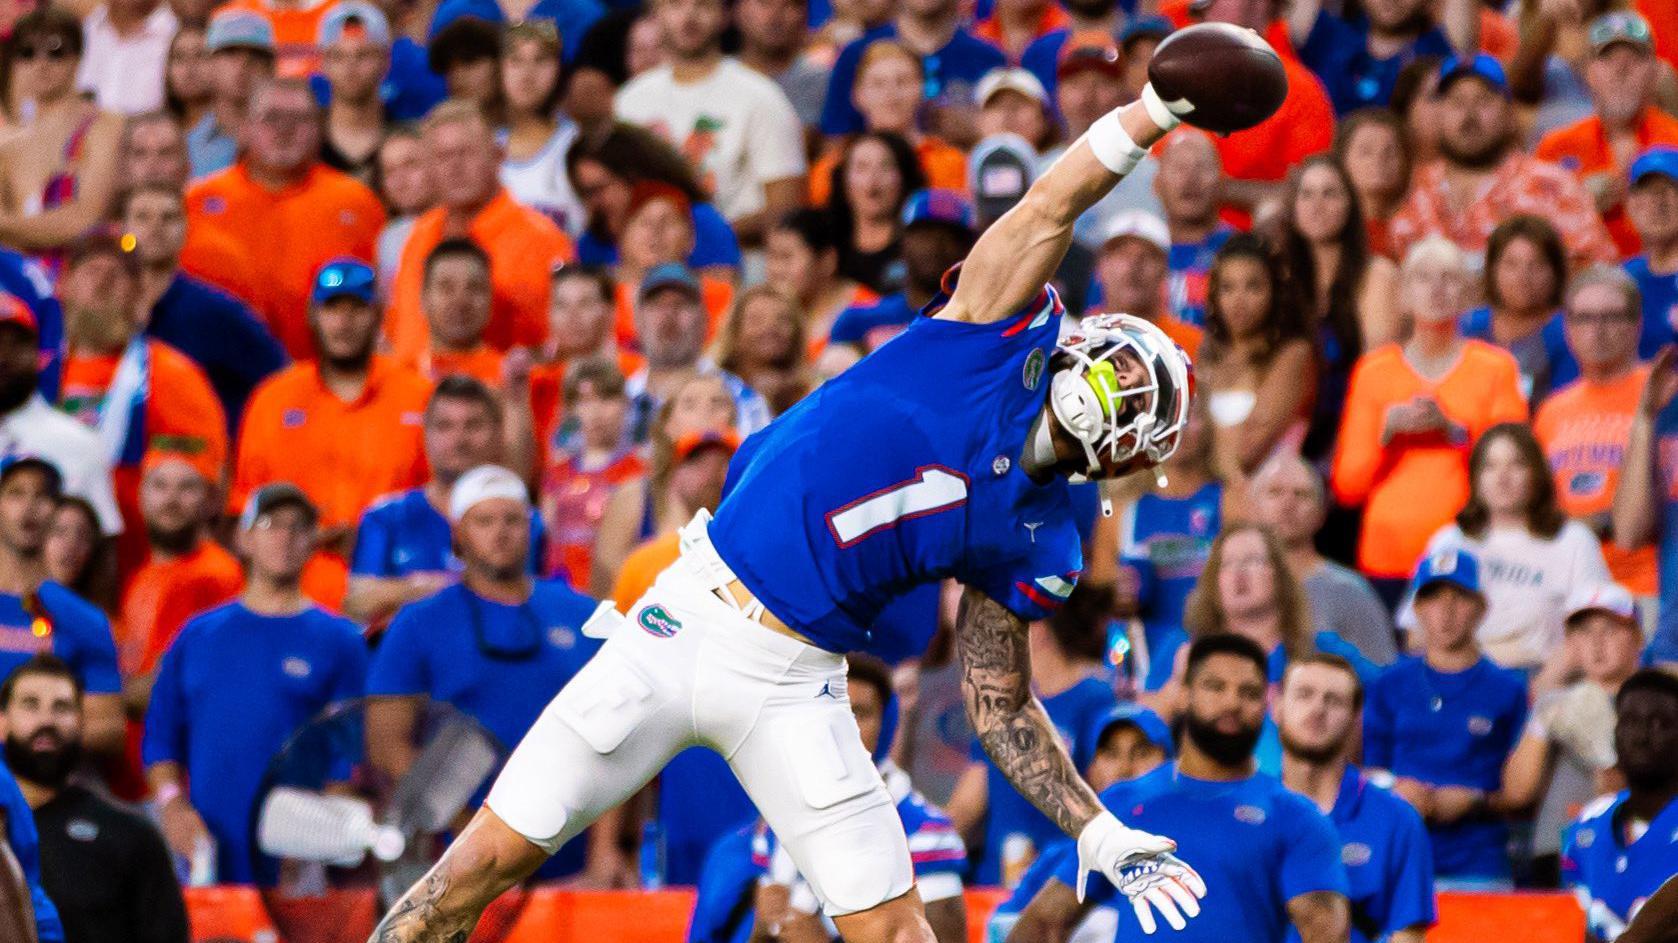 Florida's Ricky Pearsall channels OBJ with must-see grab